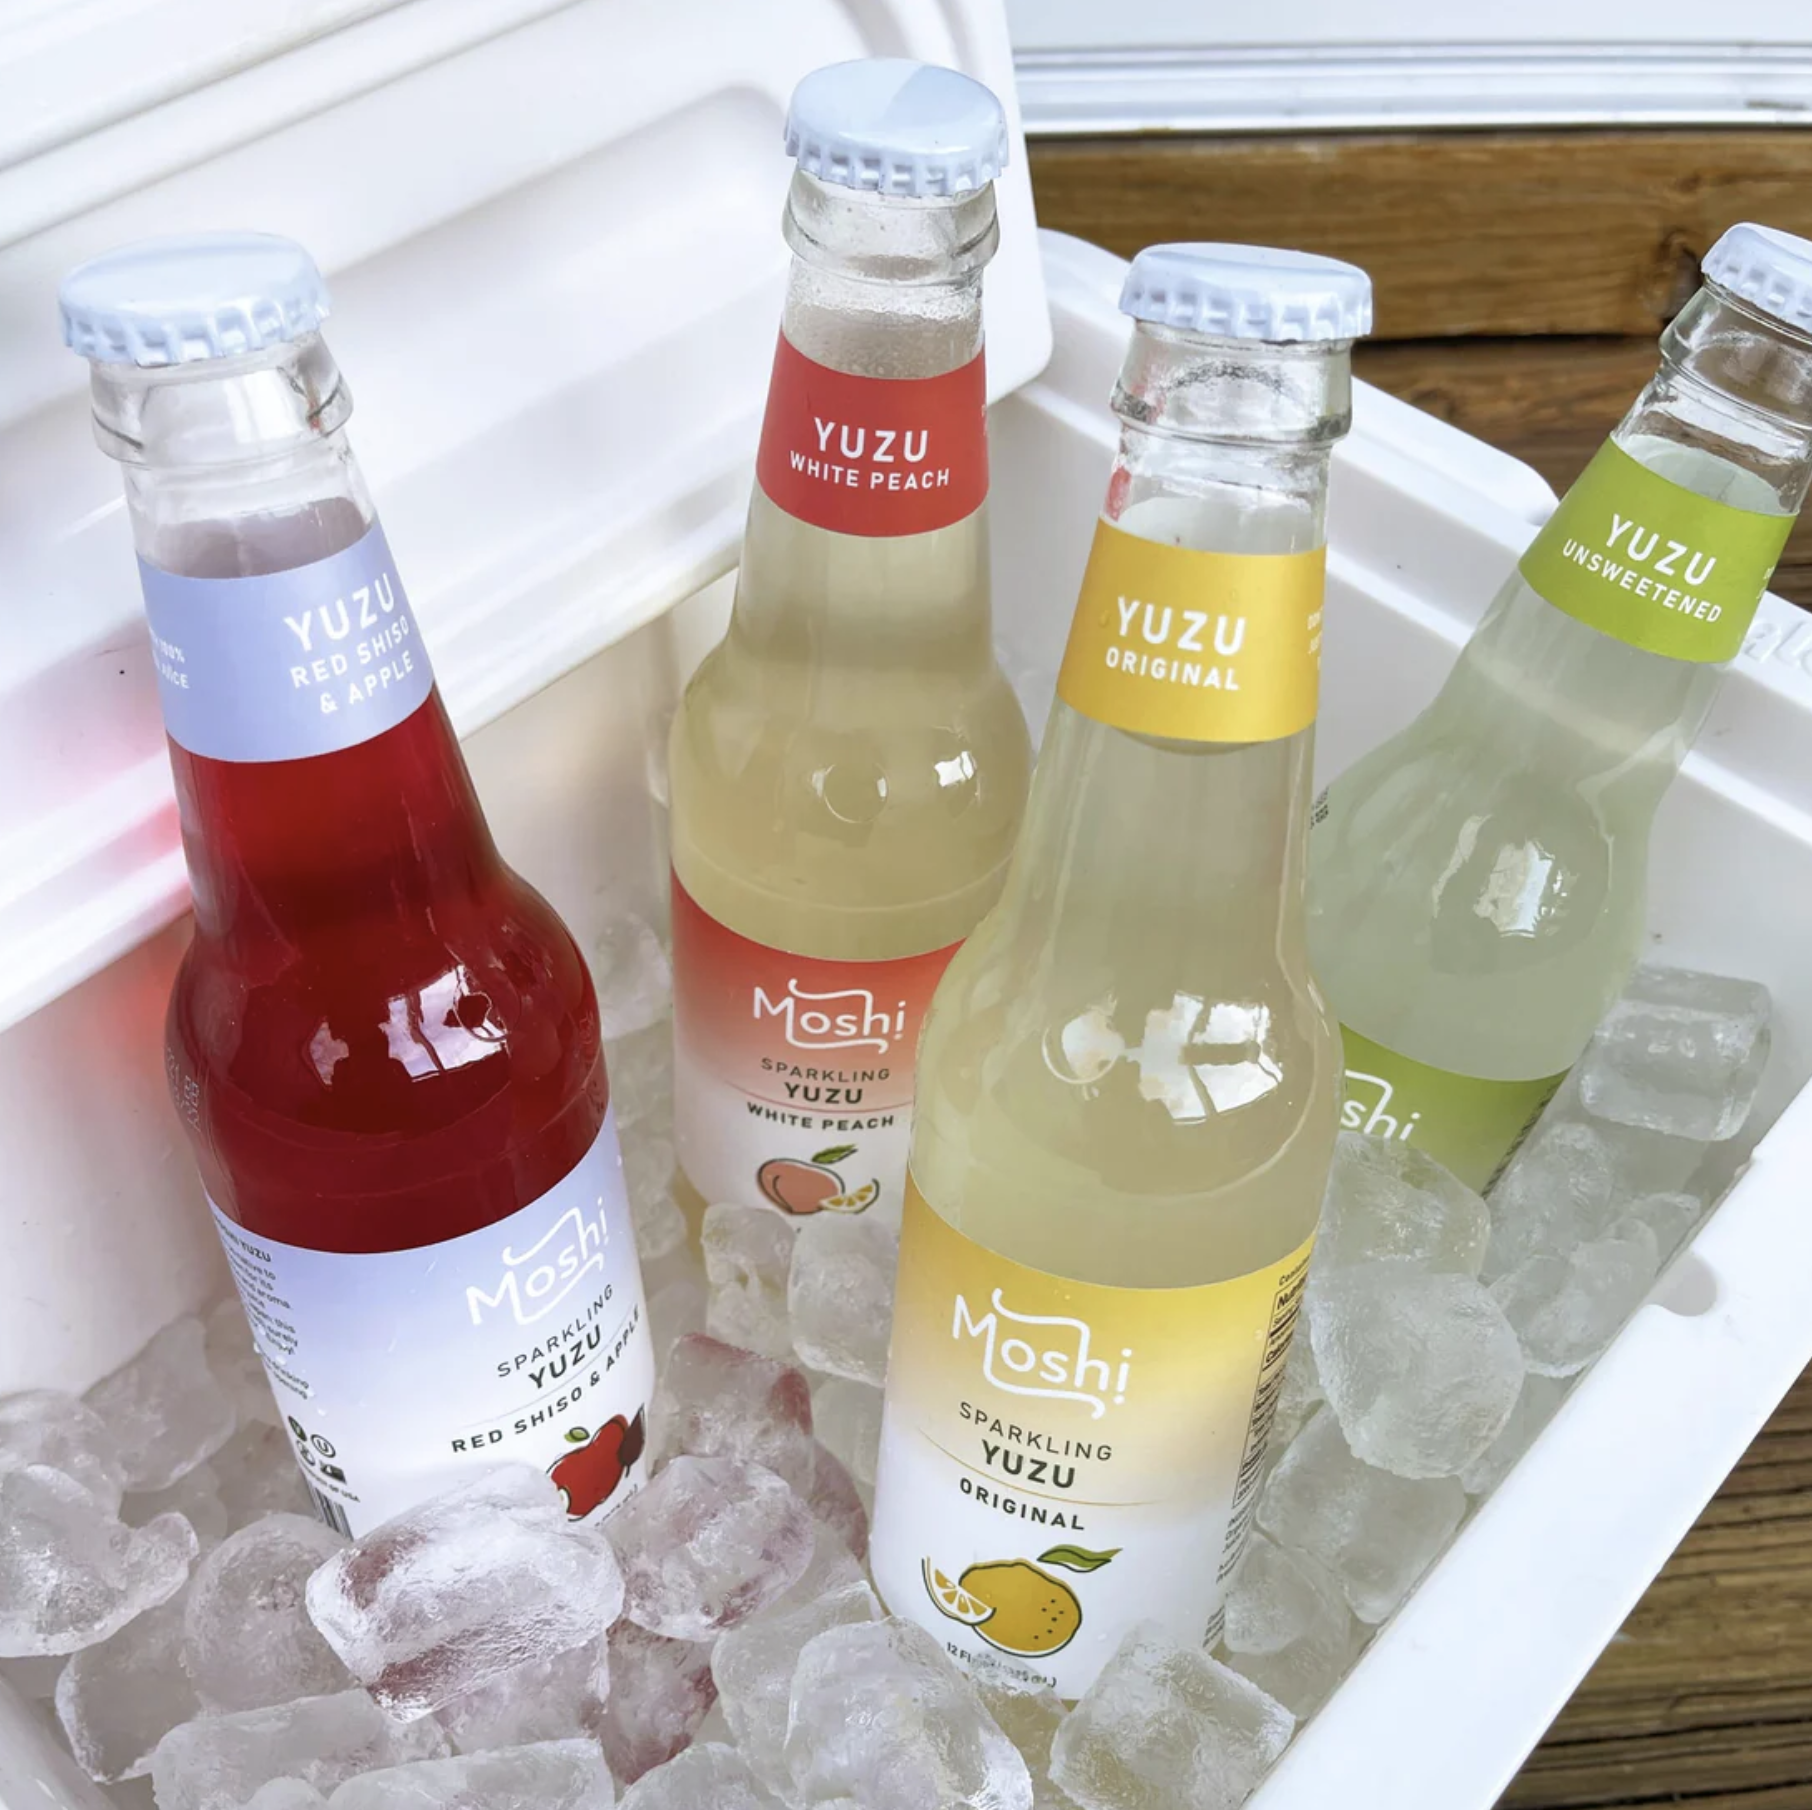 Four bottles of sparkling yuzu in a cooler full of ice.